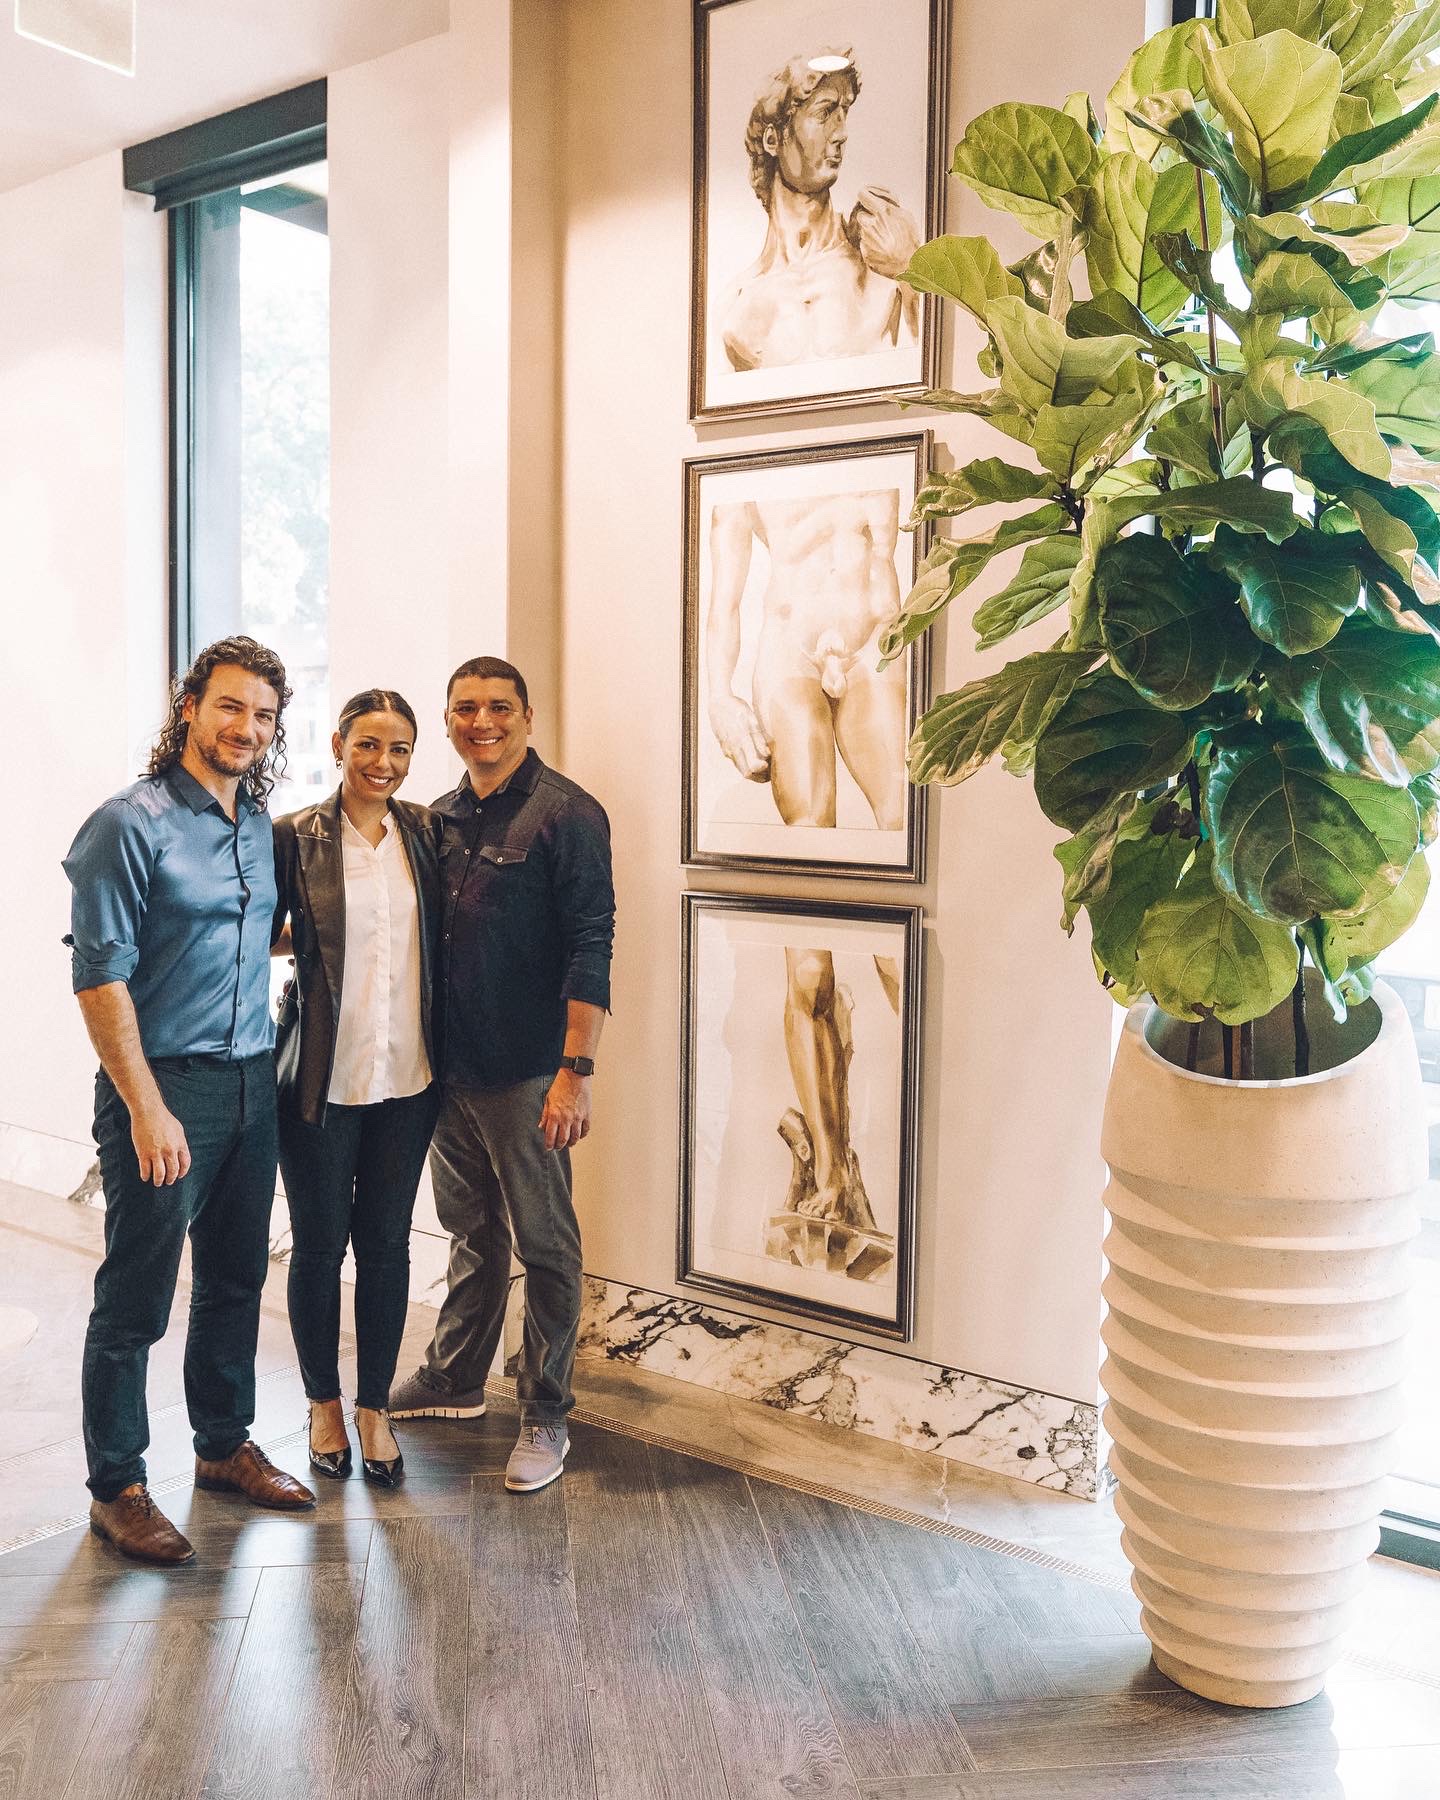 A beautiful watercolor triptych of Michelangelo's famous statue of David, now on display at Priano in Tampa, Florida, with the owners.